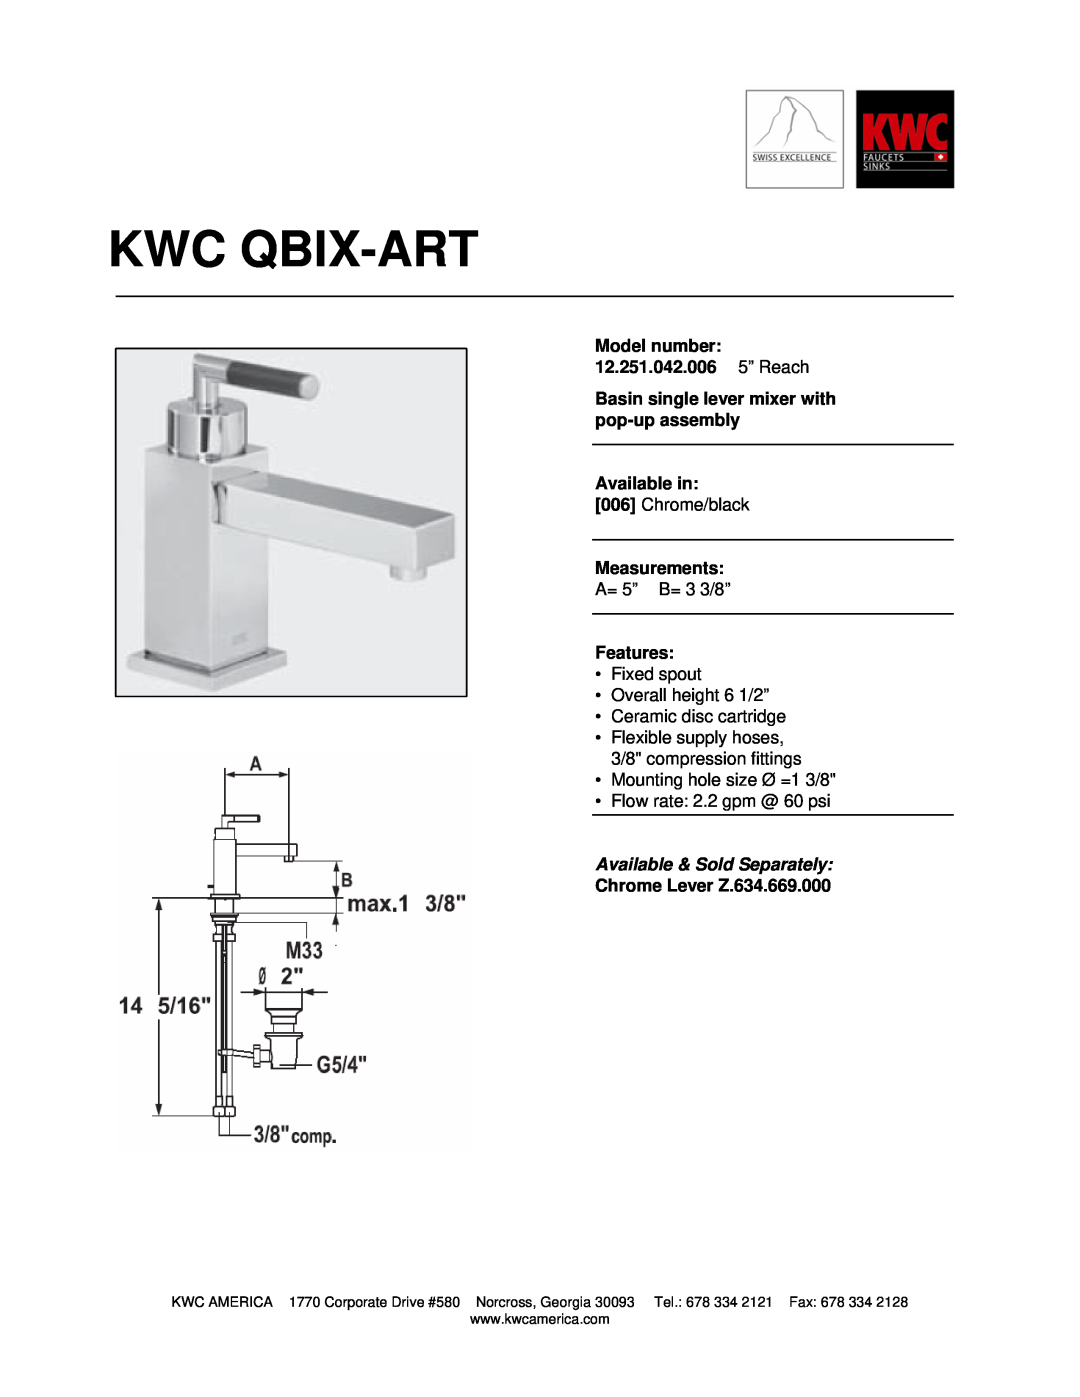 KWC manual Kwc Qbix-Art, Model number 12.251.042.006 5” Reach, Basin single lever mixer with pop-upassembly, Features 